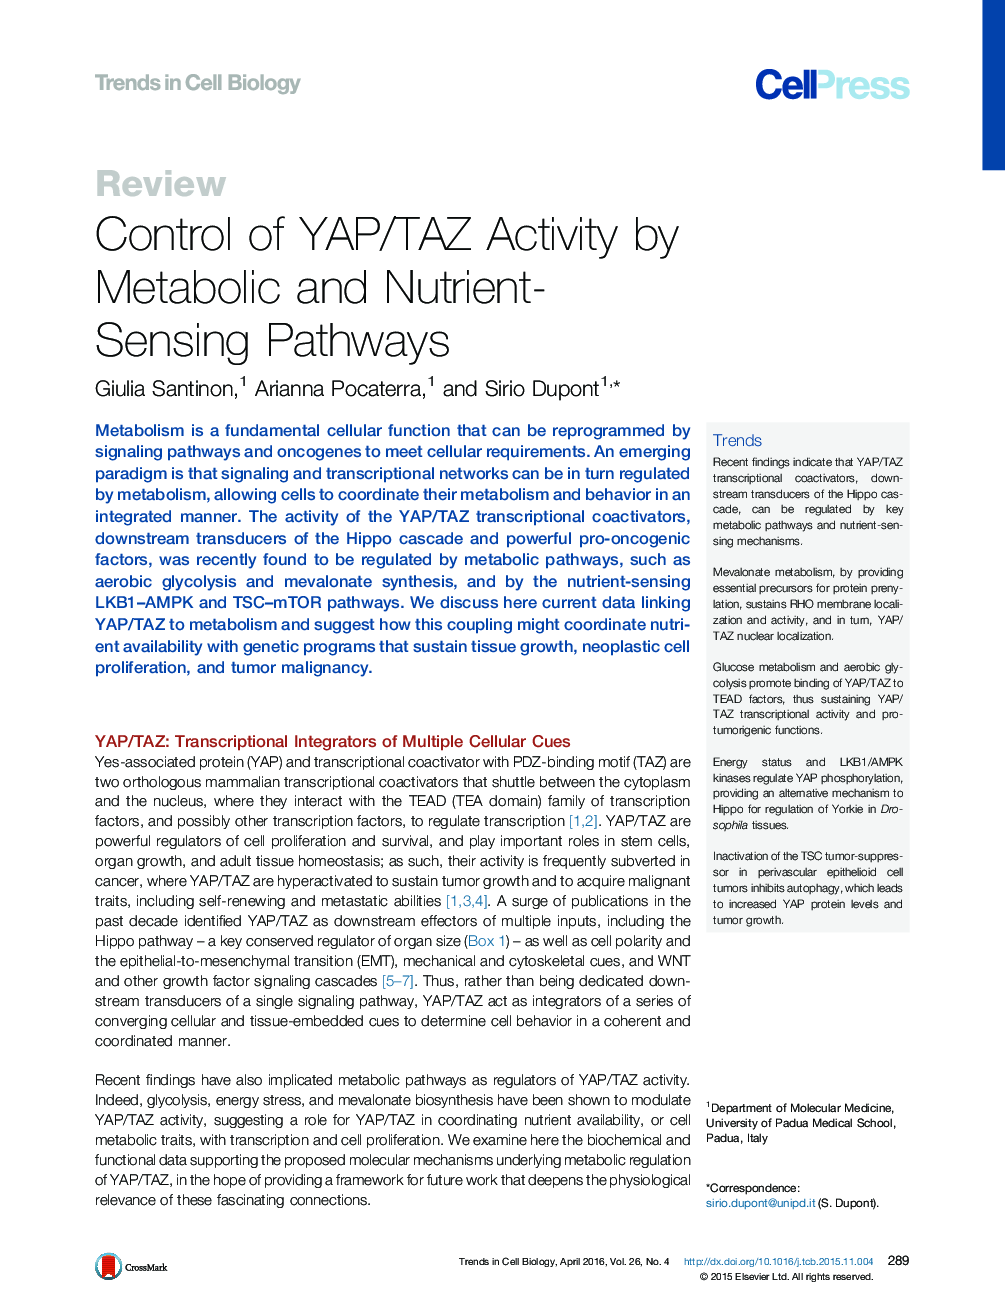 Control of YAP/TAZ Activity by Metabolic and Nutrient-Sensing Pathways